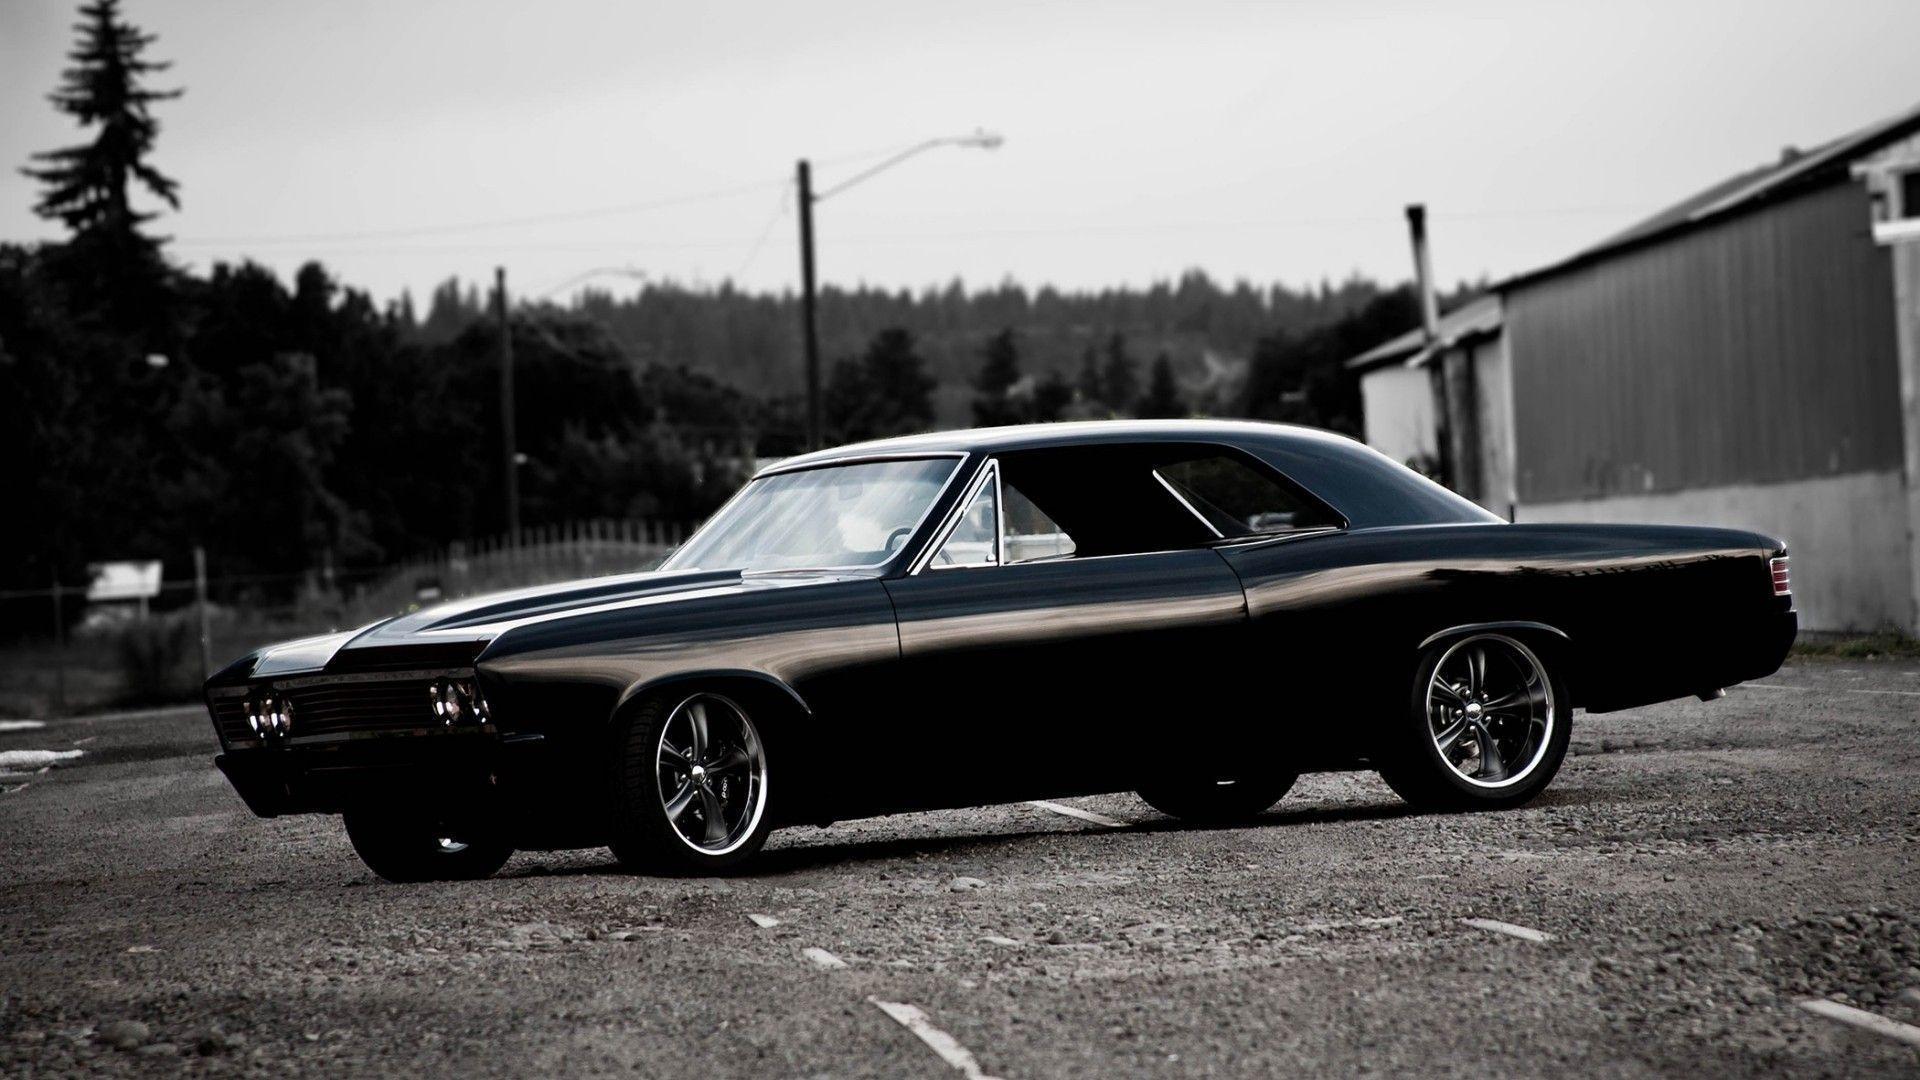 Old Chevy Muscle Cars HD Widescreen 11 HD Wallpaper. aduphoto